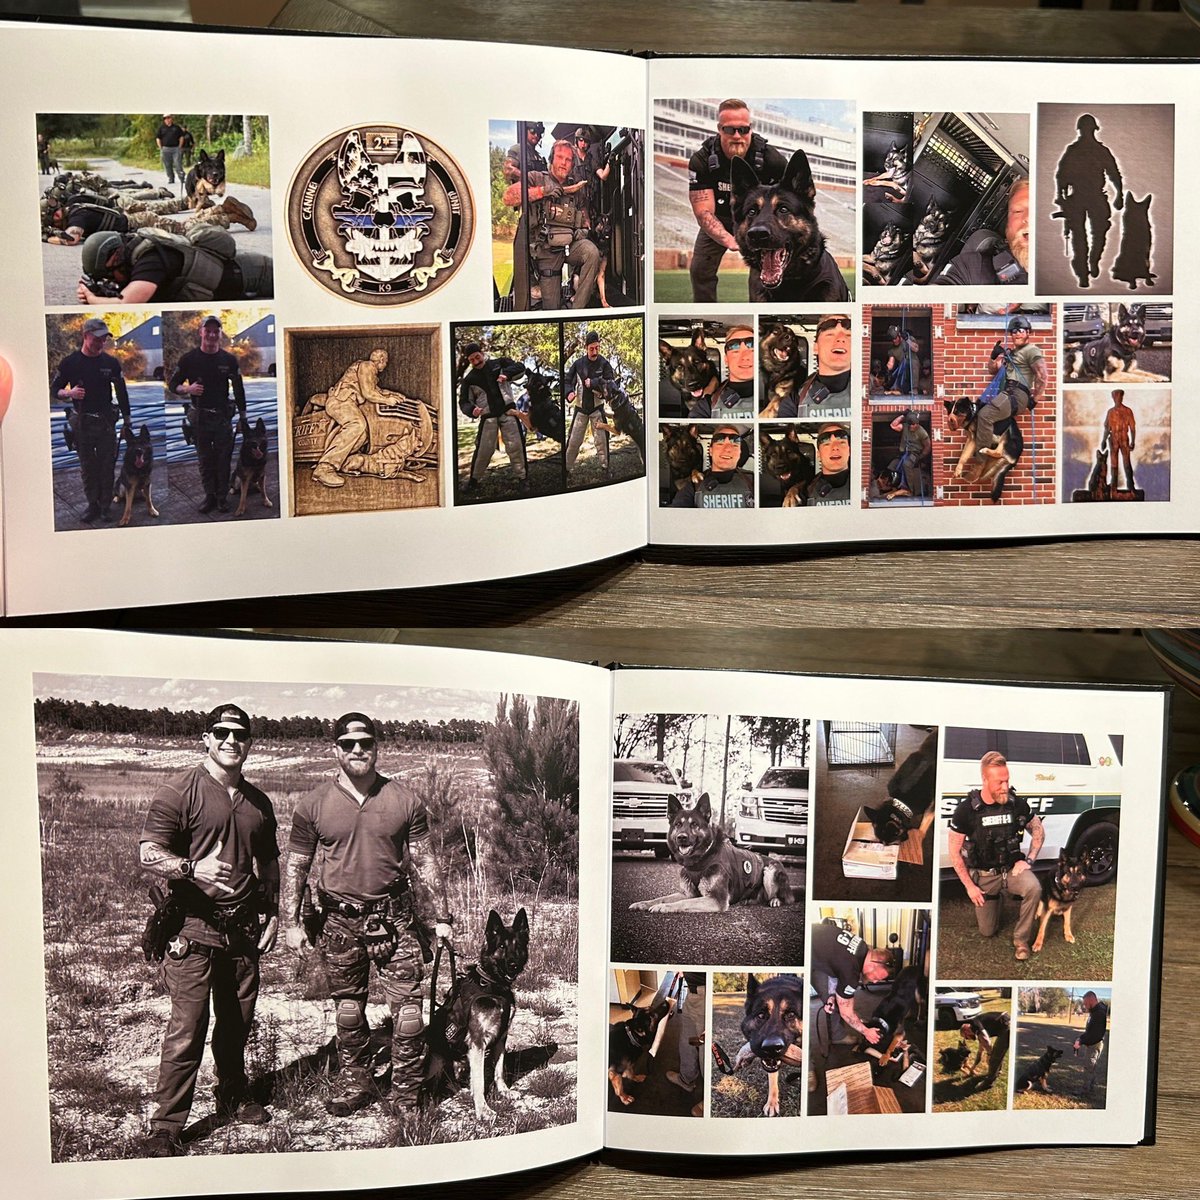 HUGE thanks to everyone who contributed to K9 Ronin’s retirement! I’ll bring them the goodies this week! (& I’ll record) Custom drawing by @Raine_draws placed in a frame box that holds keepsakes, a custom photobook to commemorate their time as a K9 team (250+pics!), toys & a GC!